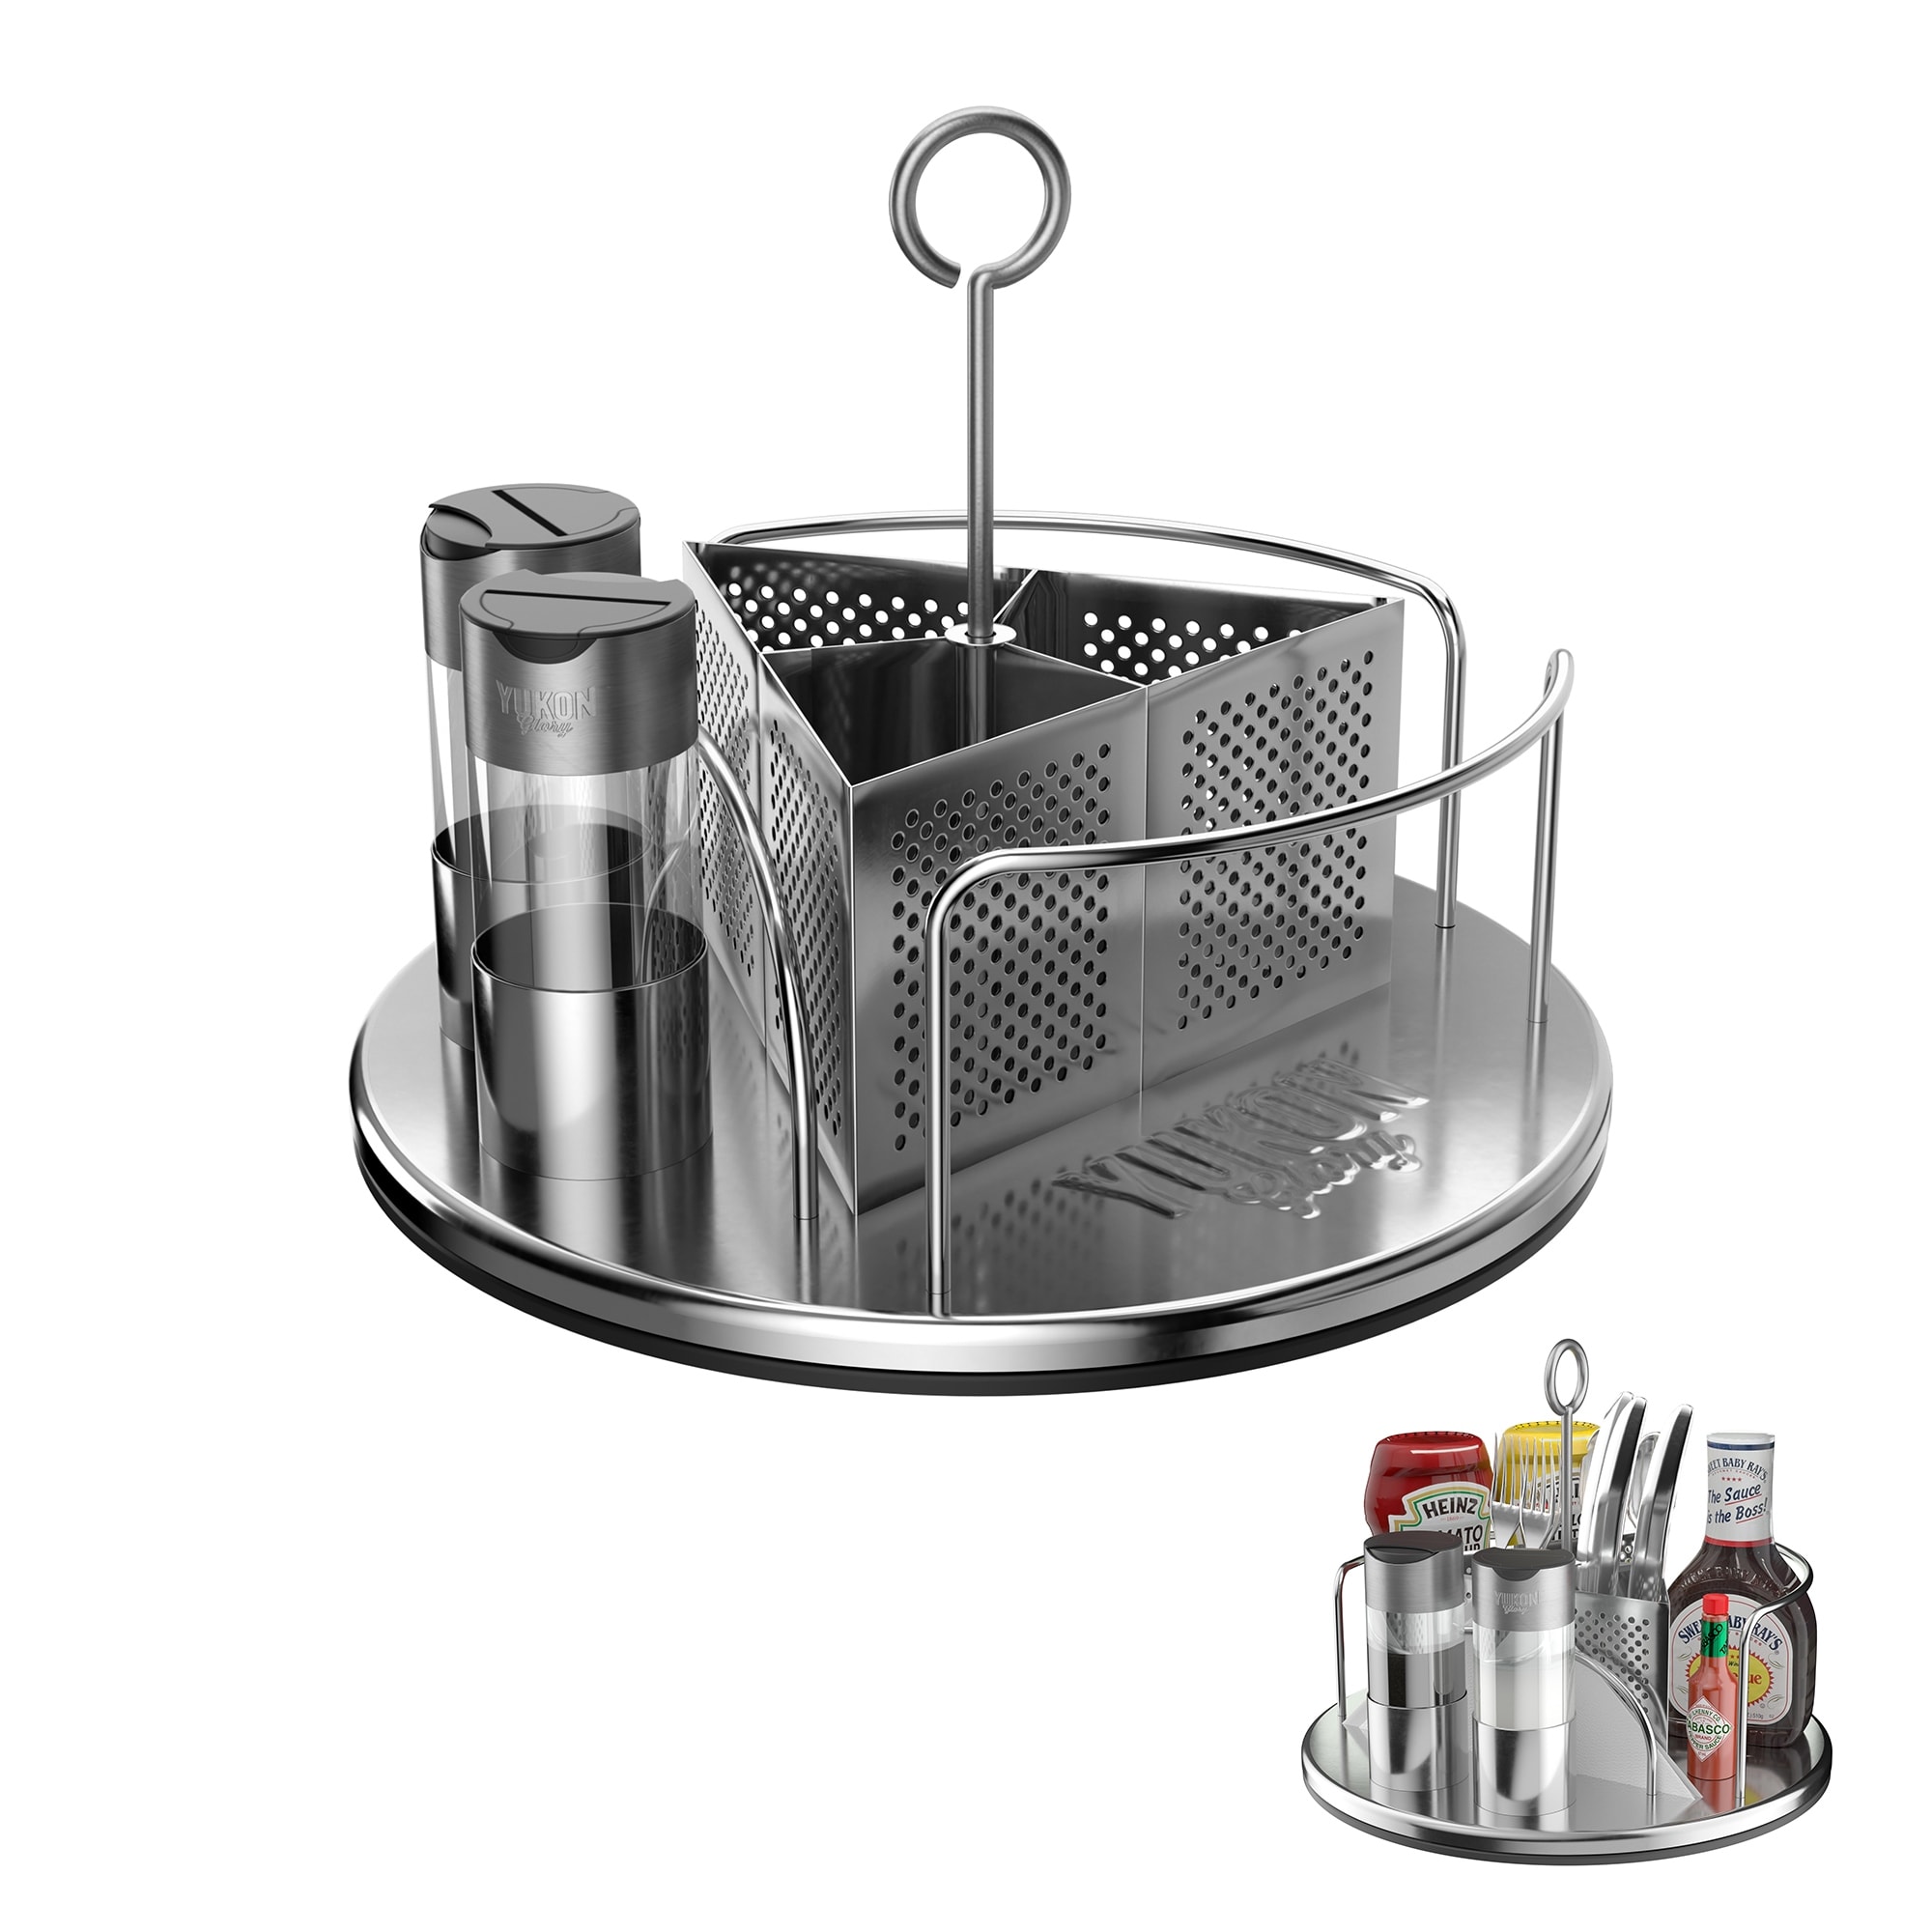 https://ak1.ostkcdn.com/images/products/is/images/direct/025bf3a1c41f0b0ddec573384889de921498bb66/Yukon-Glory-Lazy-Susan-Caddy-for-Utensils-Condiments-Napkins-Salt-and-Pepper-Ideal-for-Picnics.jpg